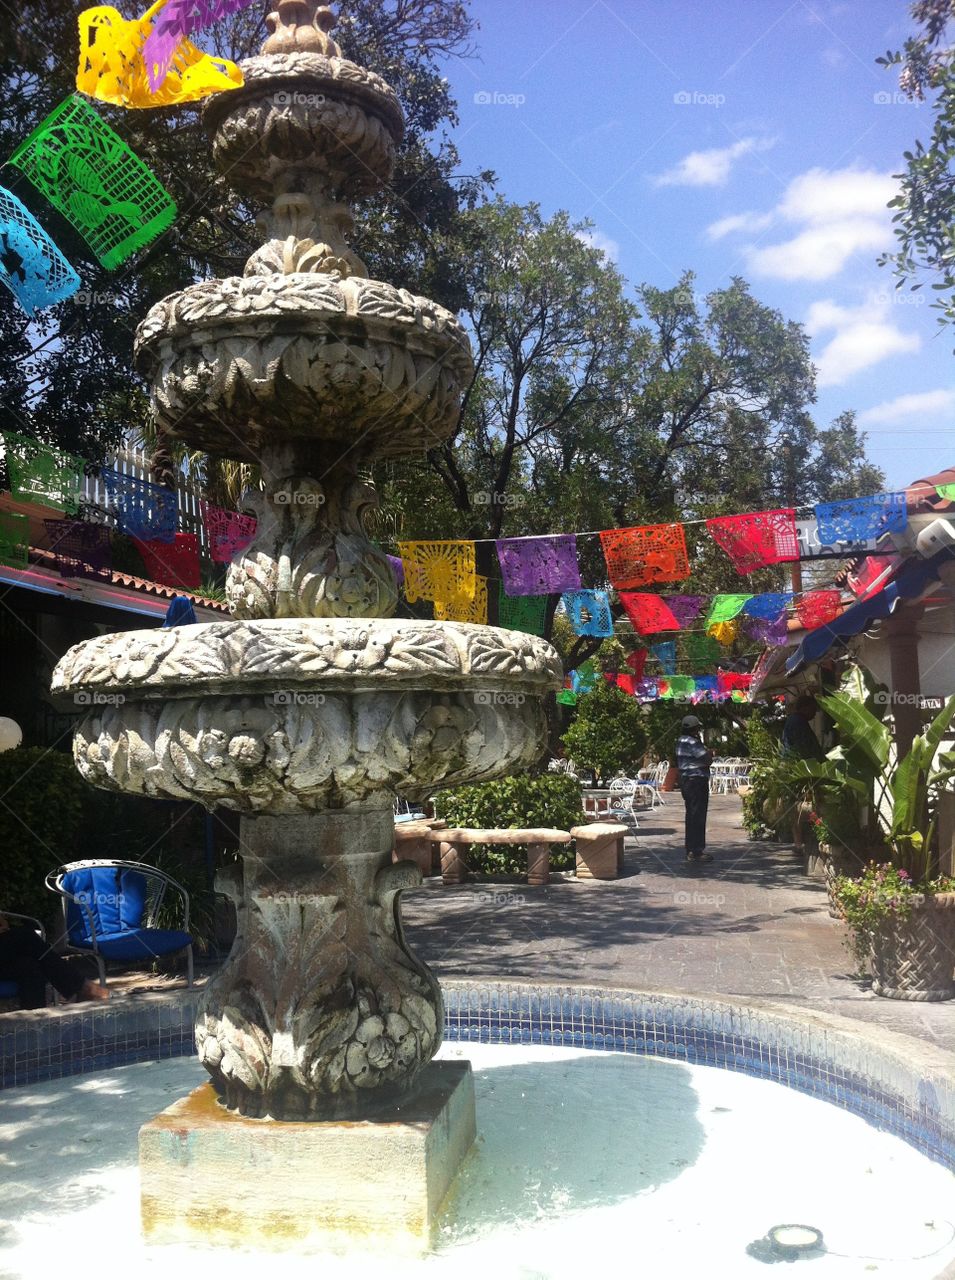 A normal fountain becomes a focal point of color and charm on the streets of San Antonio. 